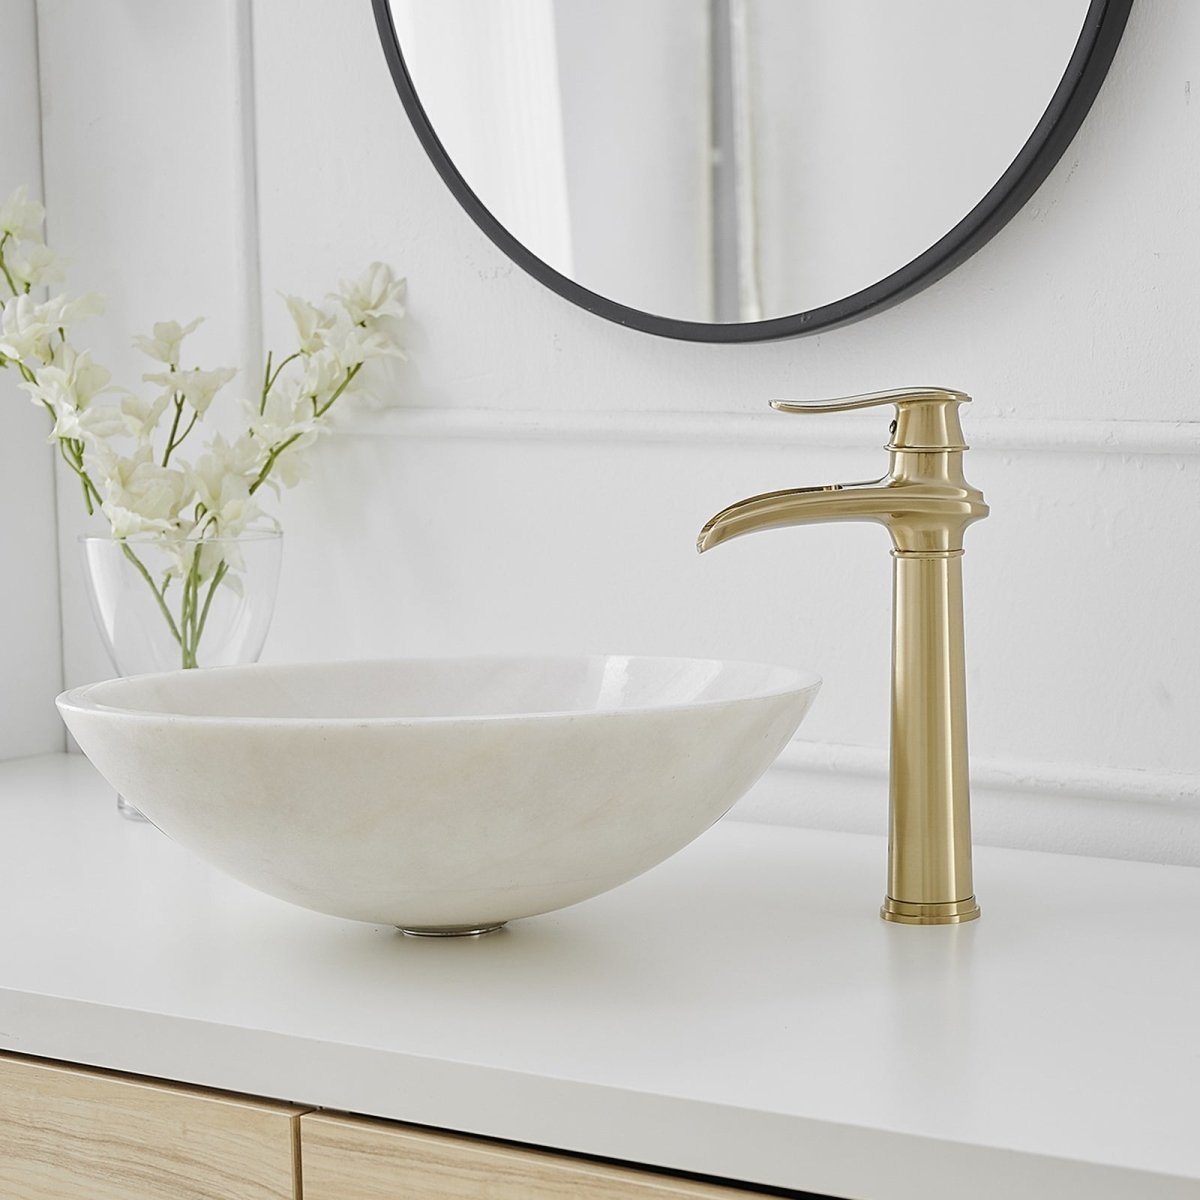 Waterfall Tall Spout Vessel Sink Bathroom Faucet Brushed Gold - buyfaucet.com